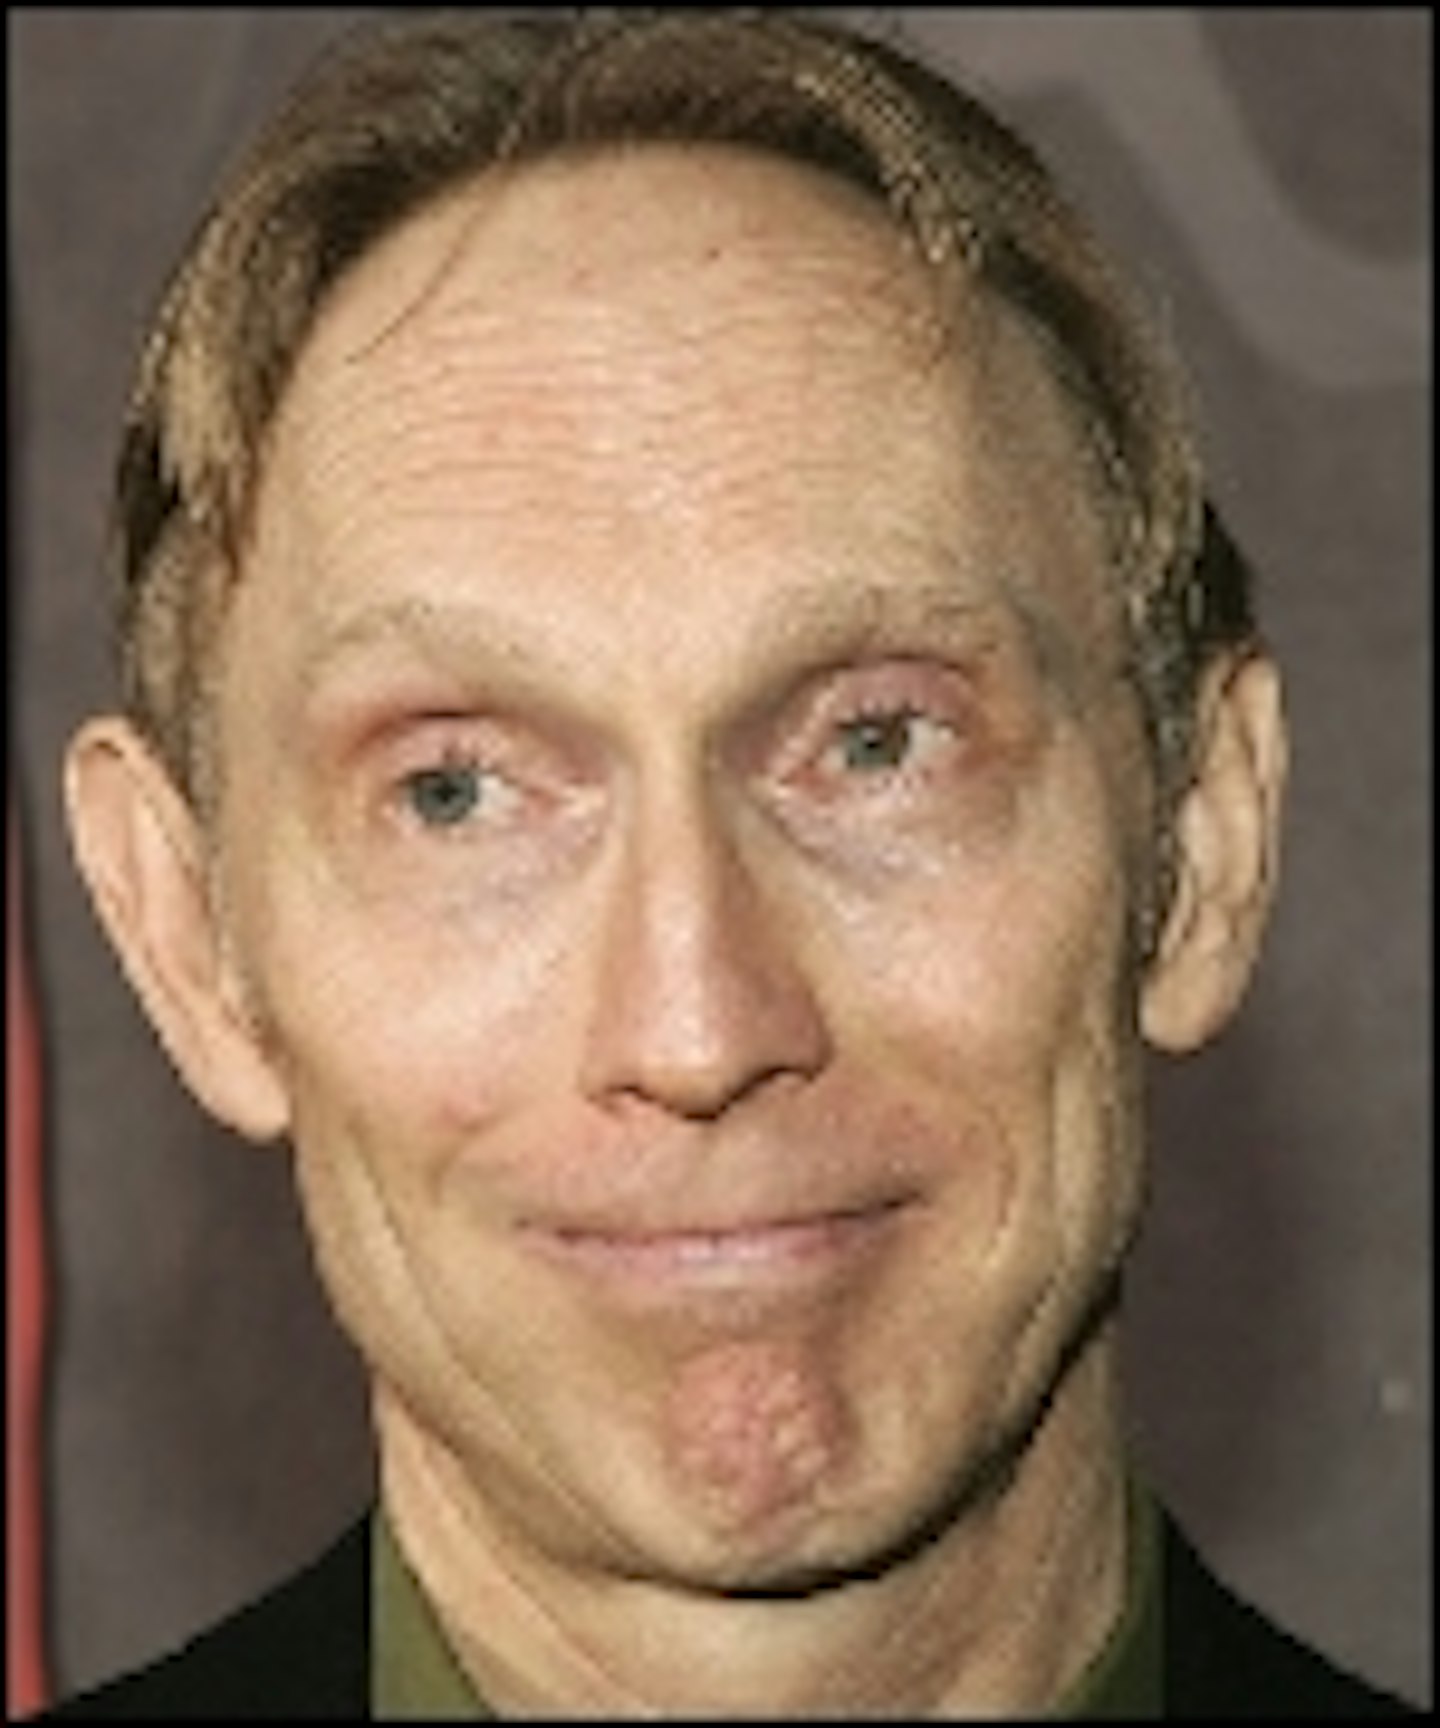 Henry Selick Signs Disney Deal